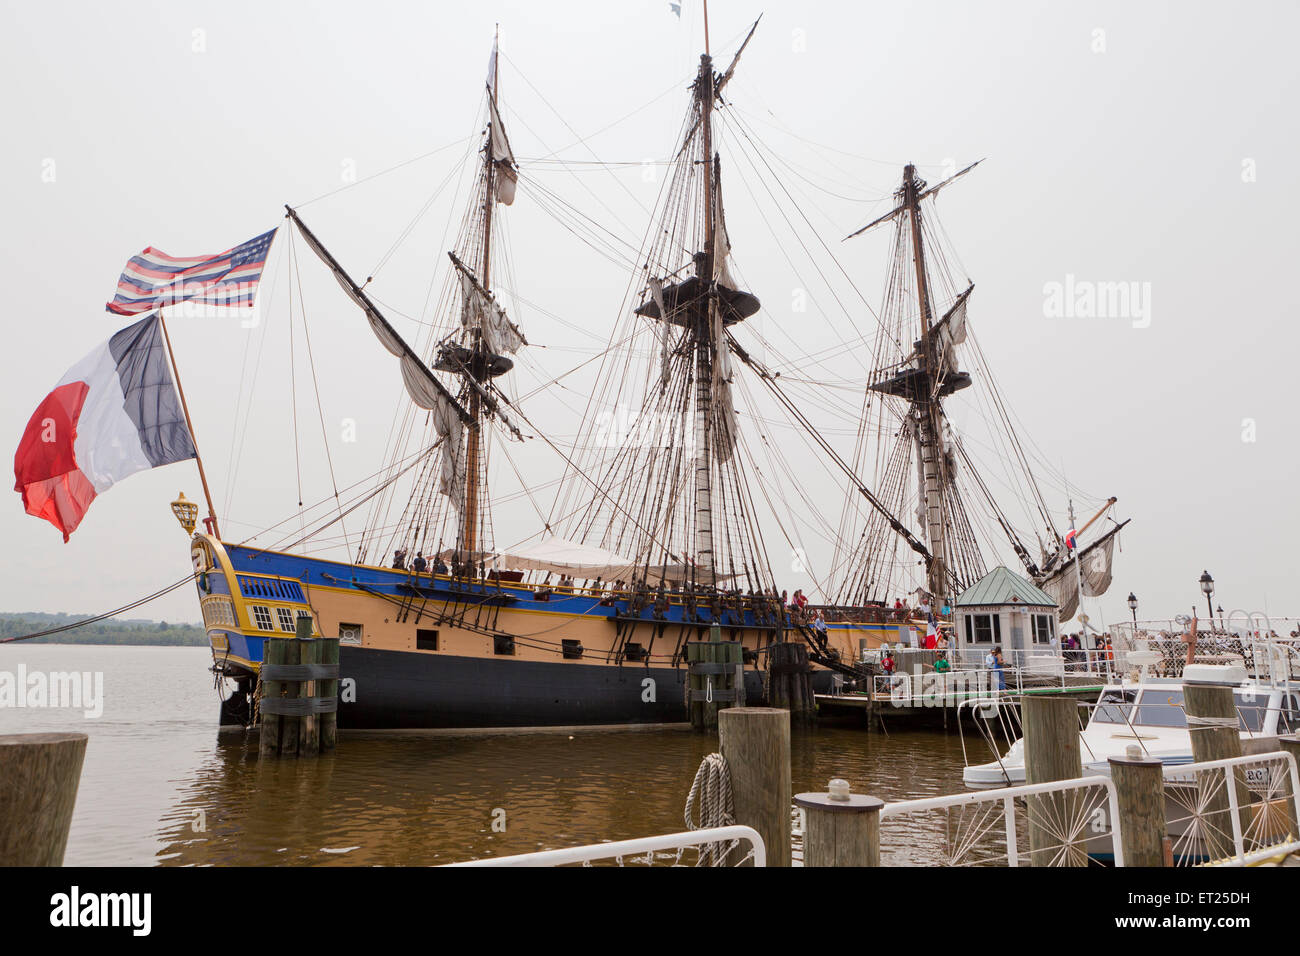 French Tall Ship Hermione docked at Alexandria, Virginia in reenactment of Marquis de Lafayette's historic voyage of 1780. Stock Photo